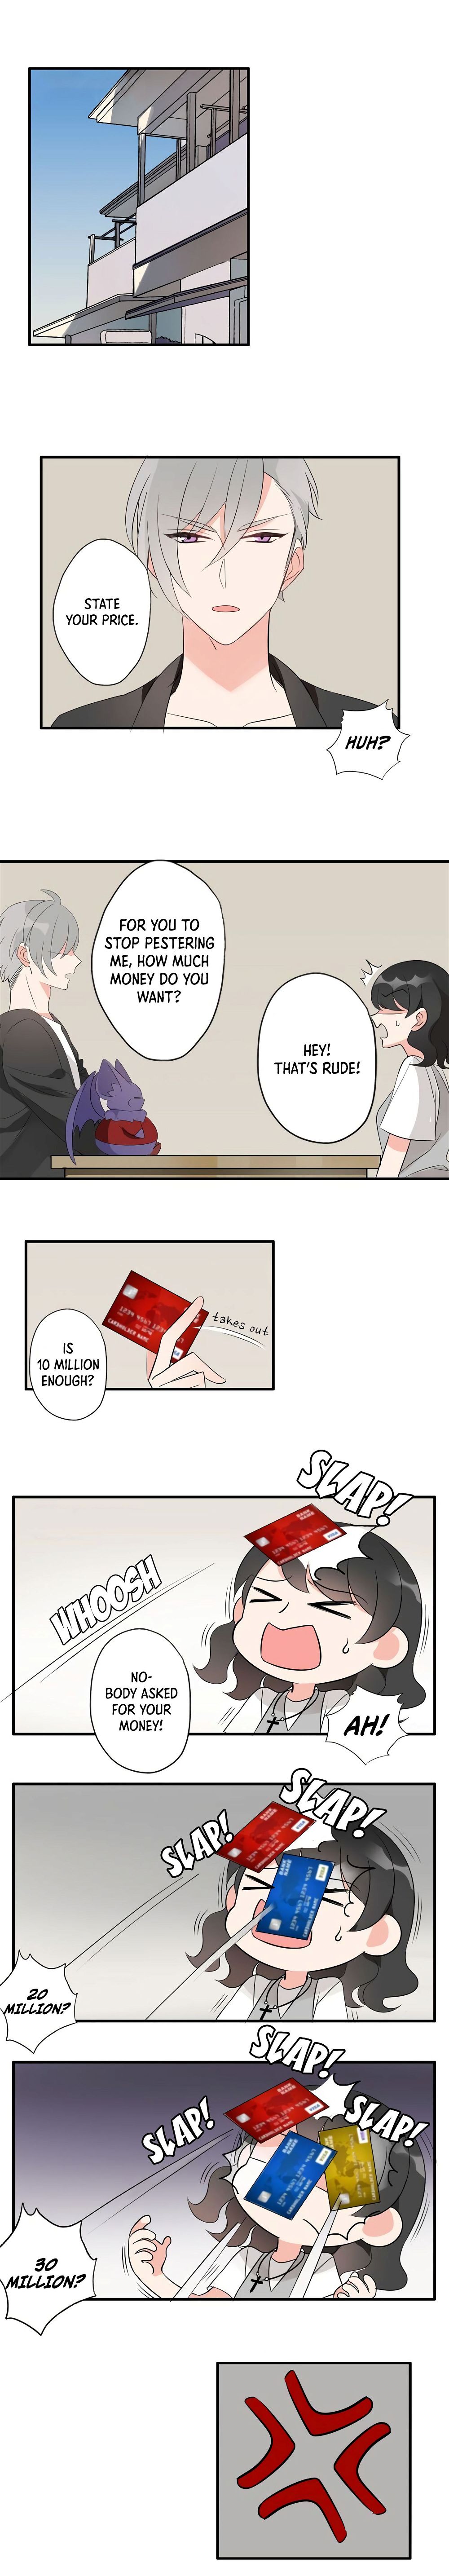 Mr. Magician and Miss Science Chapter 4 - Page 2